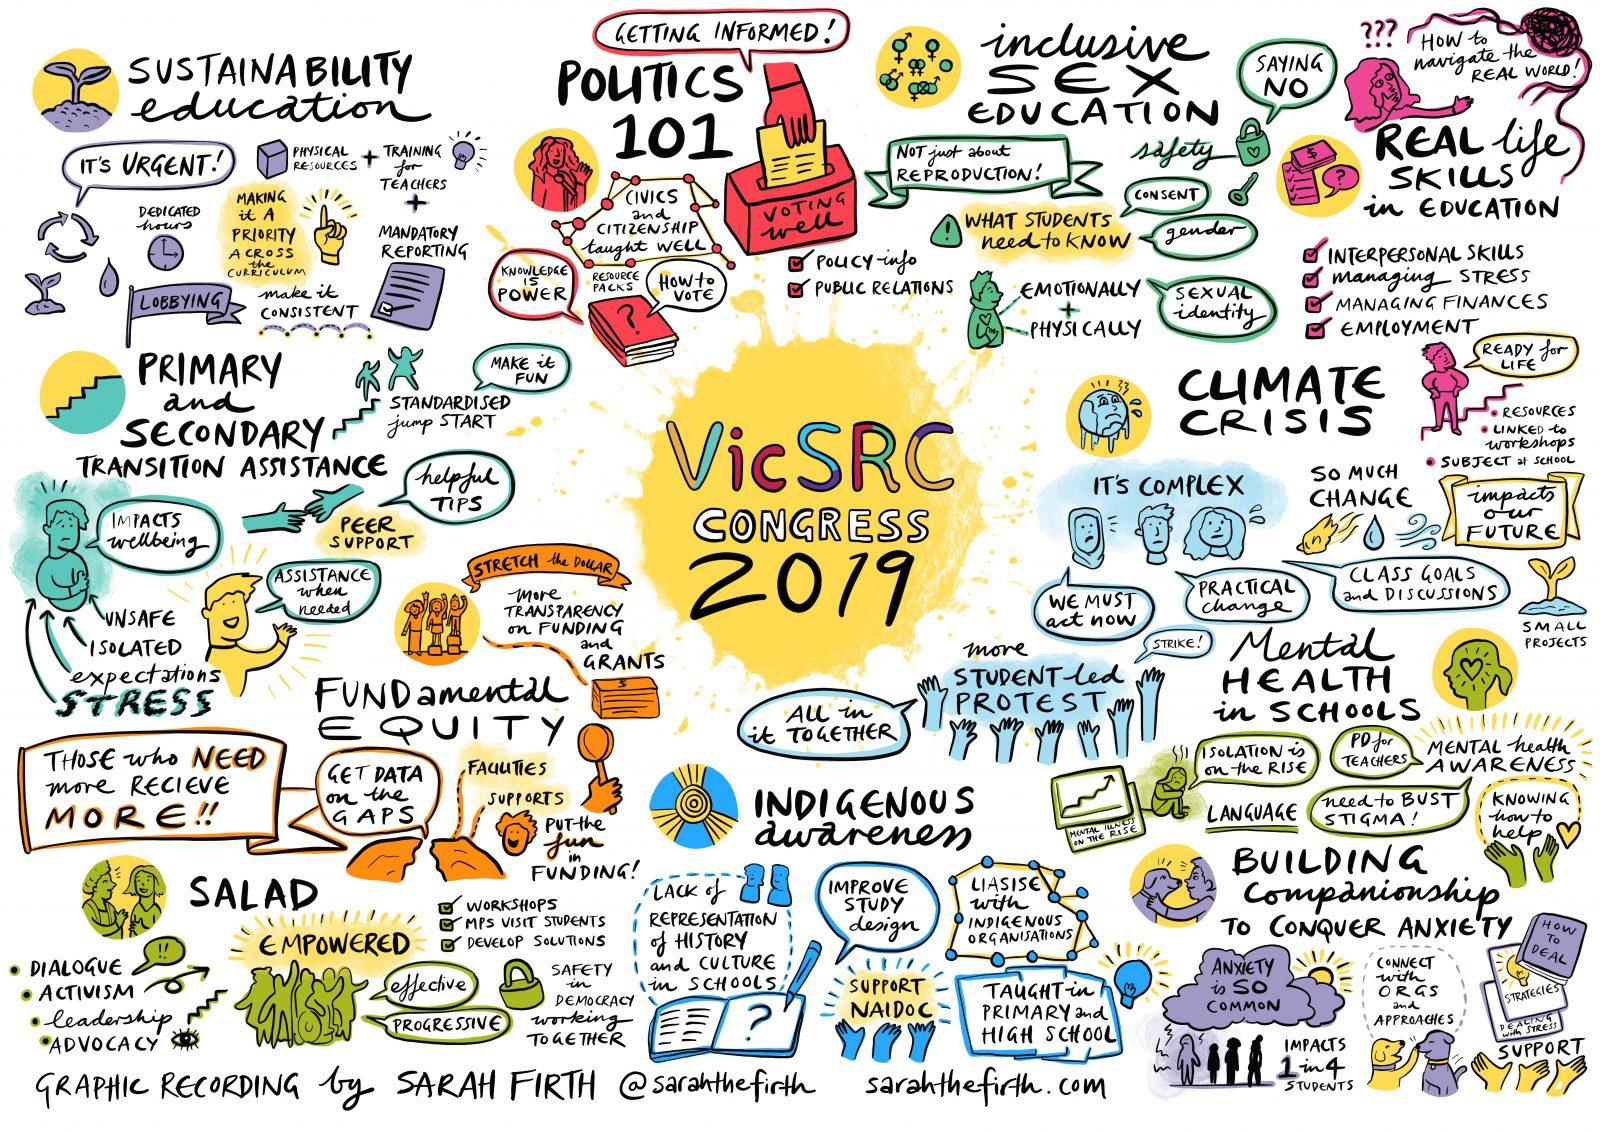 Graphic facilitation of the issues and ideas discussed at Congress 2019.